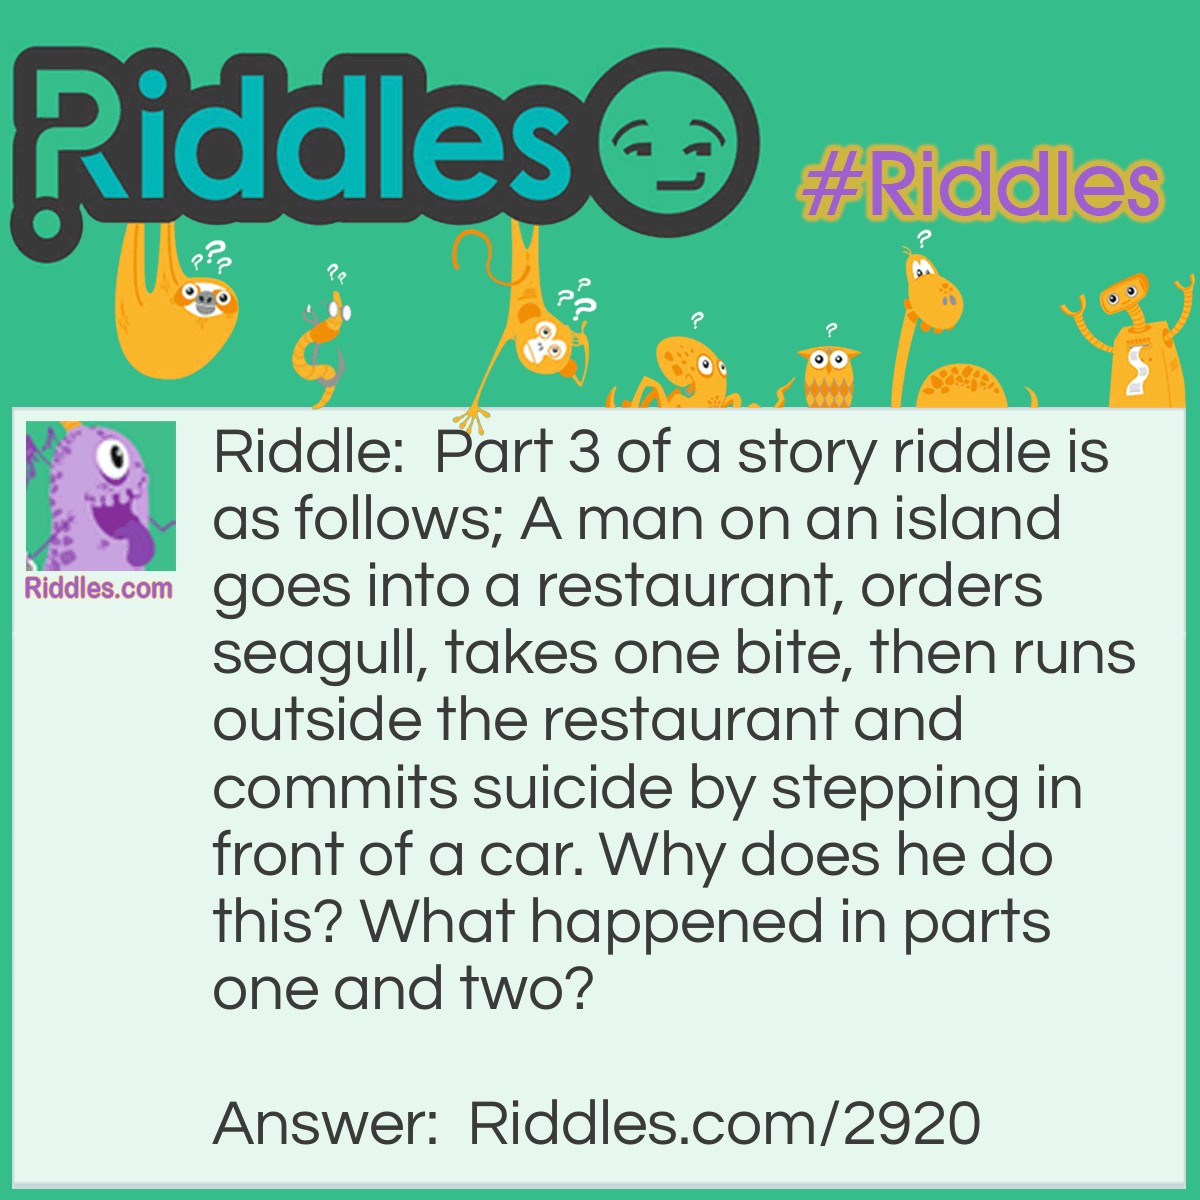 Riddle: Part 3 of a story riddle is as follows; A man on an island goes into a restaurant, orders seagull, takes one bite, then runs outside the restaurant and commits suicide by stepping in front of a car. Why does he do this? What happened in parts one and two? Answer: Part 1: The man is in a shipwreck. Everybody survives and swims to an island. Little do they know that the island is already inhabited by vicious natives. Part 2: People start disappearing, one by one. The survivors are confused, and think that they must have gotten lost somewhere. Everybody disappears, until only the man is left. One day some of the natives come out of the woods. They ask him why he is alone and he explains how he ended up and this island and how everybody somehow got lost. Sympathizing, they invite him to dinner, where he eats what they tell him is seagull. This is the first time he has ever eaten seagull, and he loves it. The natives give the man a raft, laughing at something he doesn't understand. He sails to the island with the restaurant. Part 3: The man on the island goes into the restaurant and orders seagull since he liked it so much with the natives. He takes one bite and realizes it tastes different. He realizes he was eating his friends on the island, and that is why the natives were laughing. He feels so guilty that he runs outside the restaurant and commits suicide.